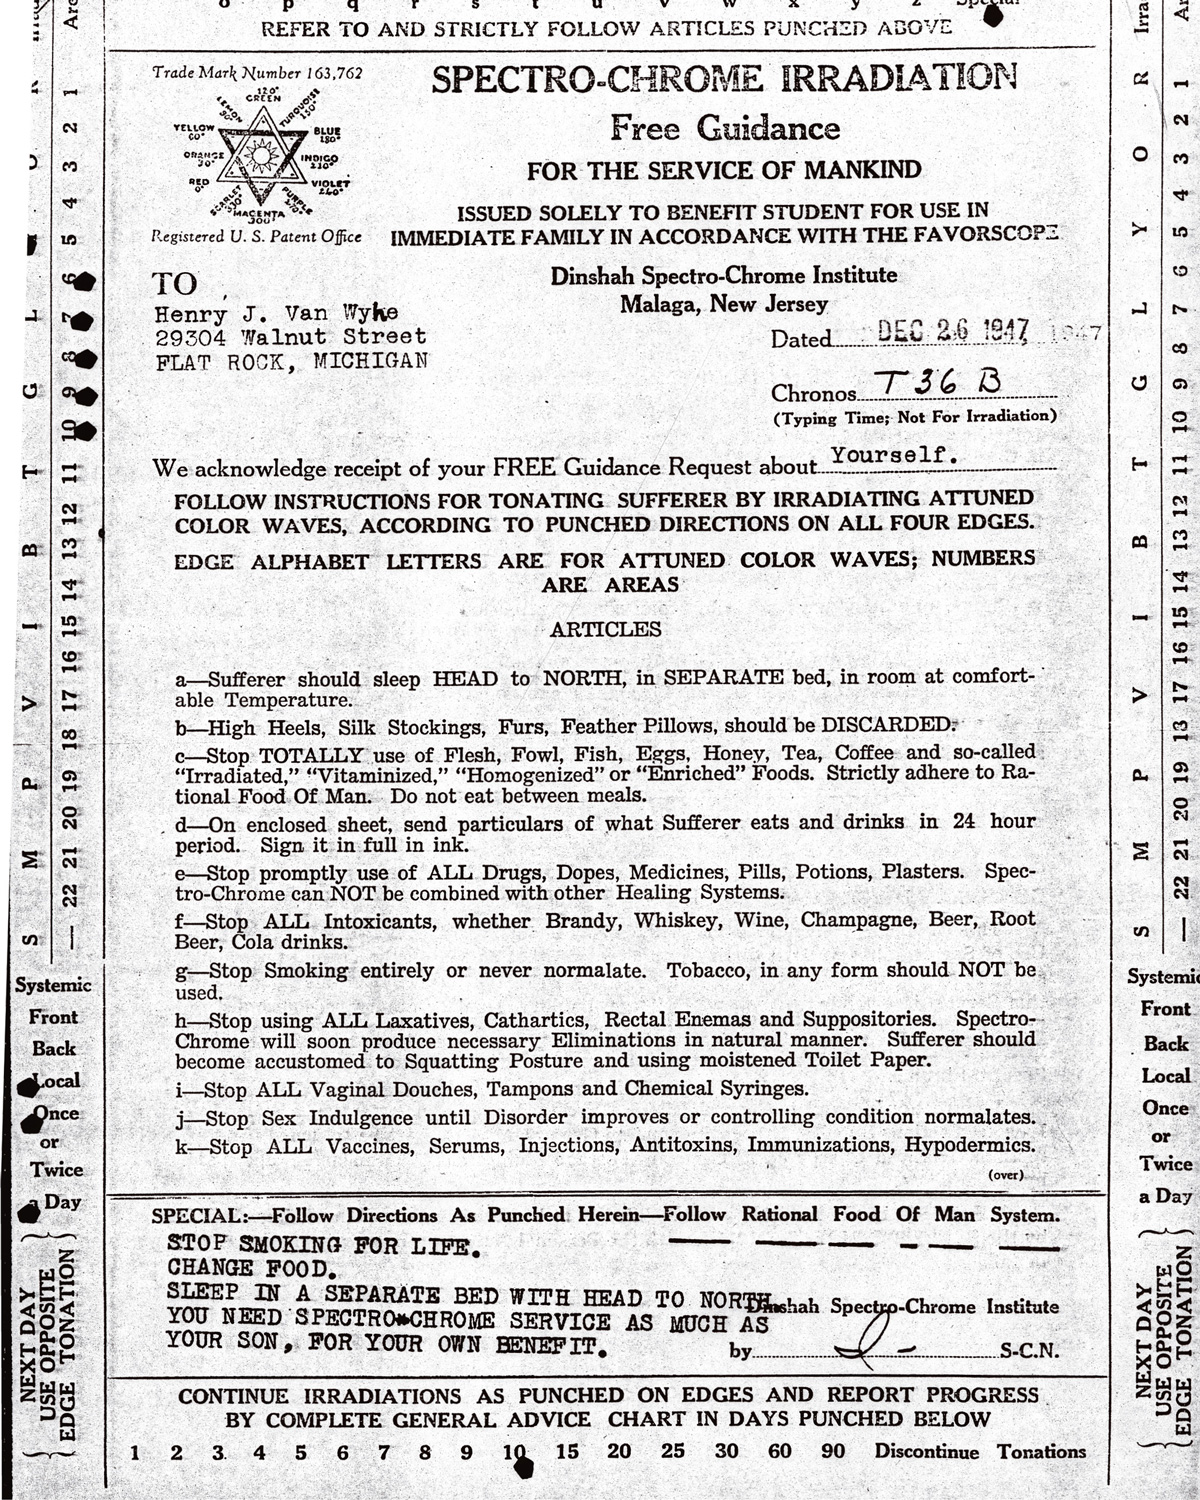 An image of Ghadiali’s “Free Guidance Chart” from 1947. 